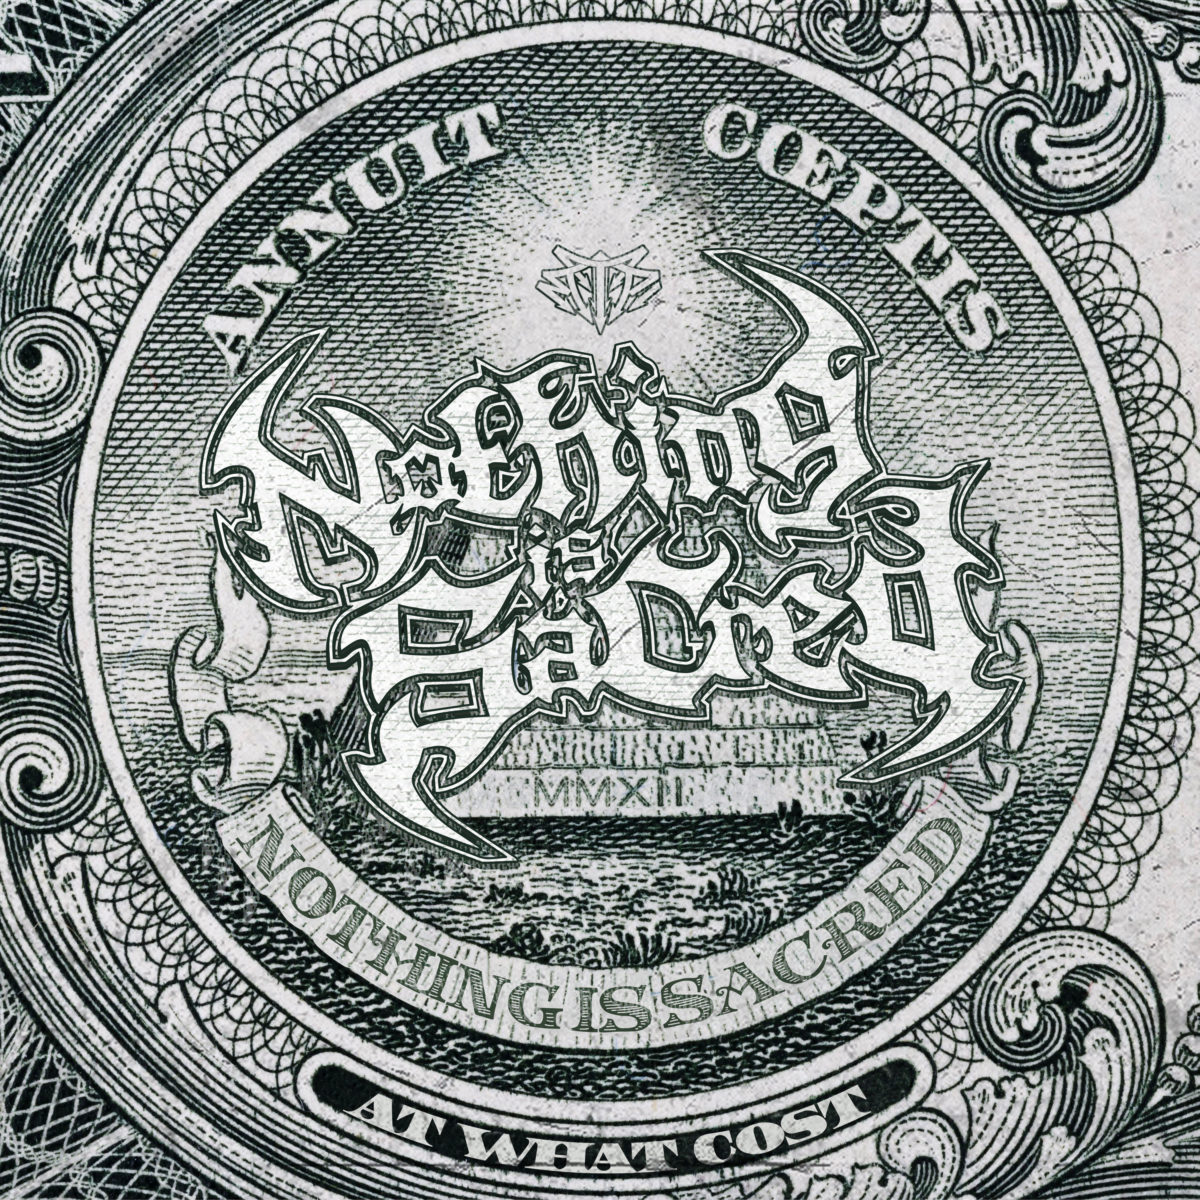 Nothing is Sacred - At What Cost (CD)